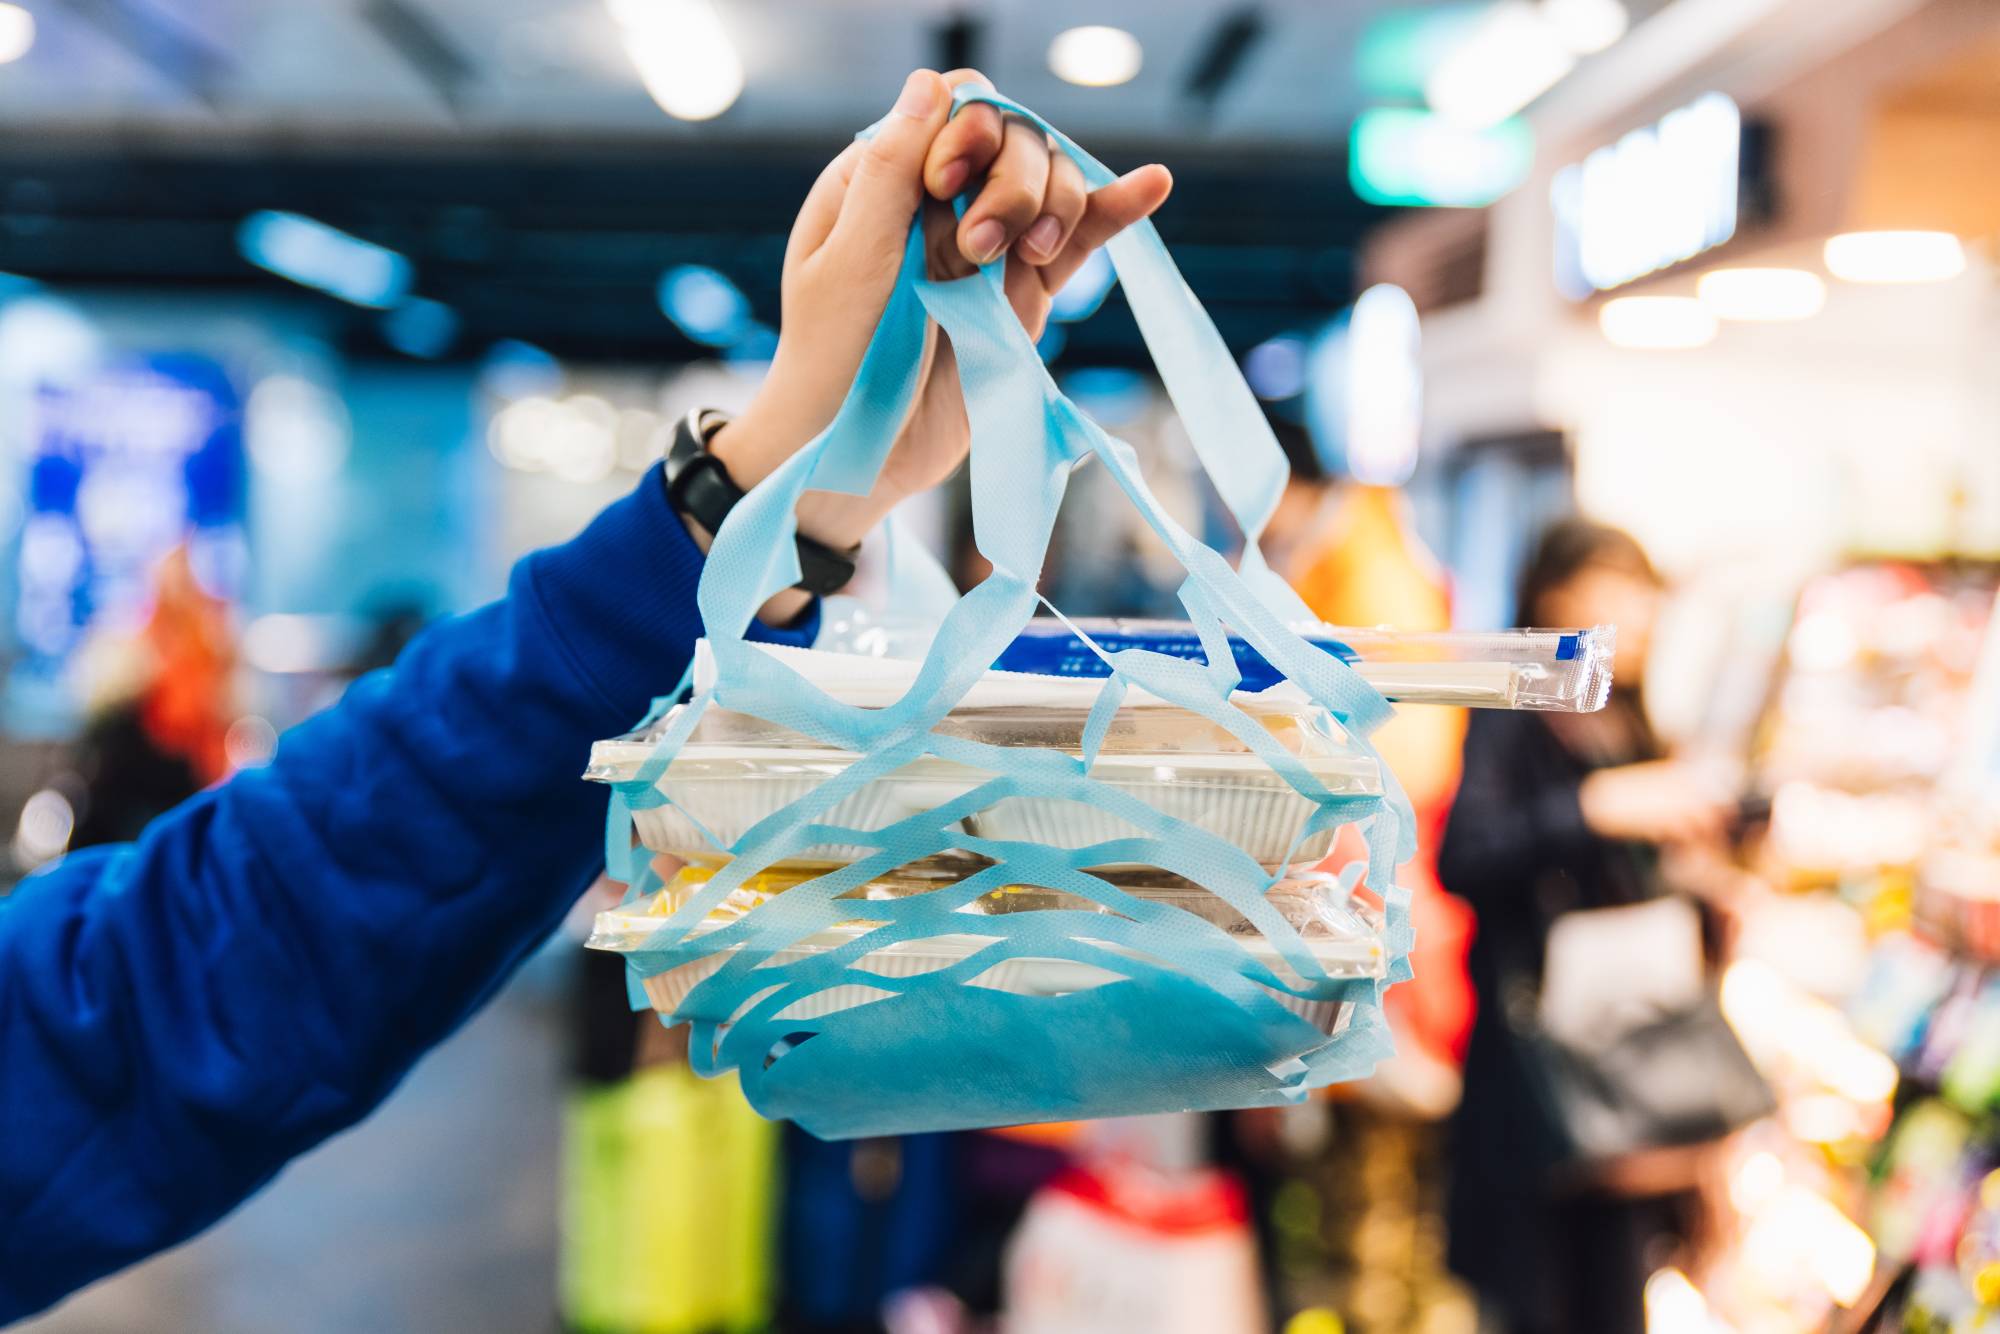 Towards a plastic-free 2021: COVID-19 has prompted a resurgence in single-use packaging, but Japan should promote reusable containers and ditch plastic utensils instead. | GETTY IMAGES